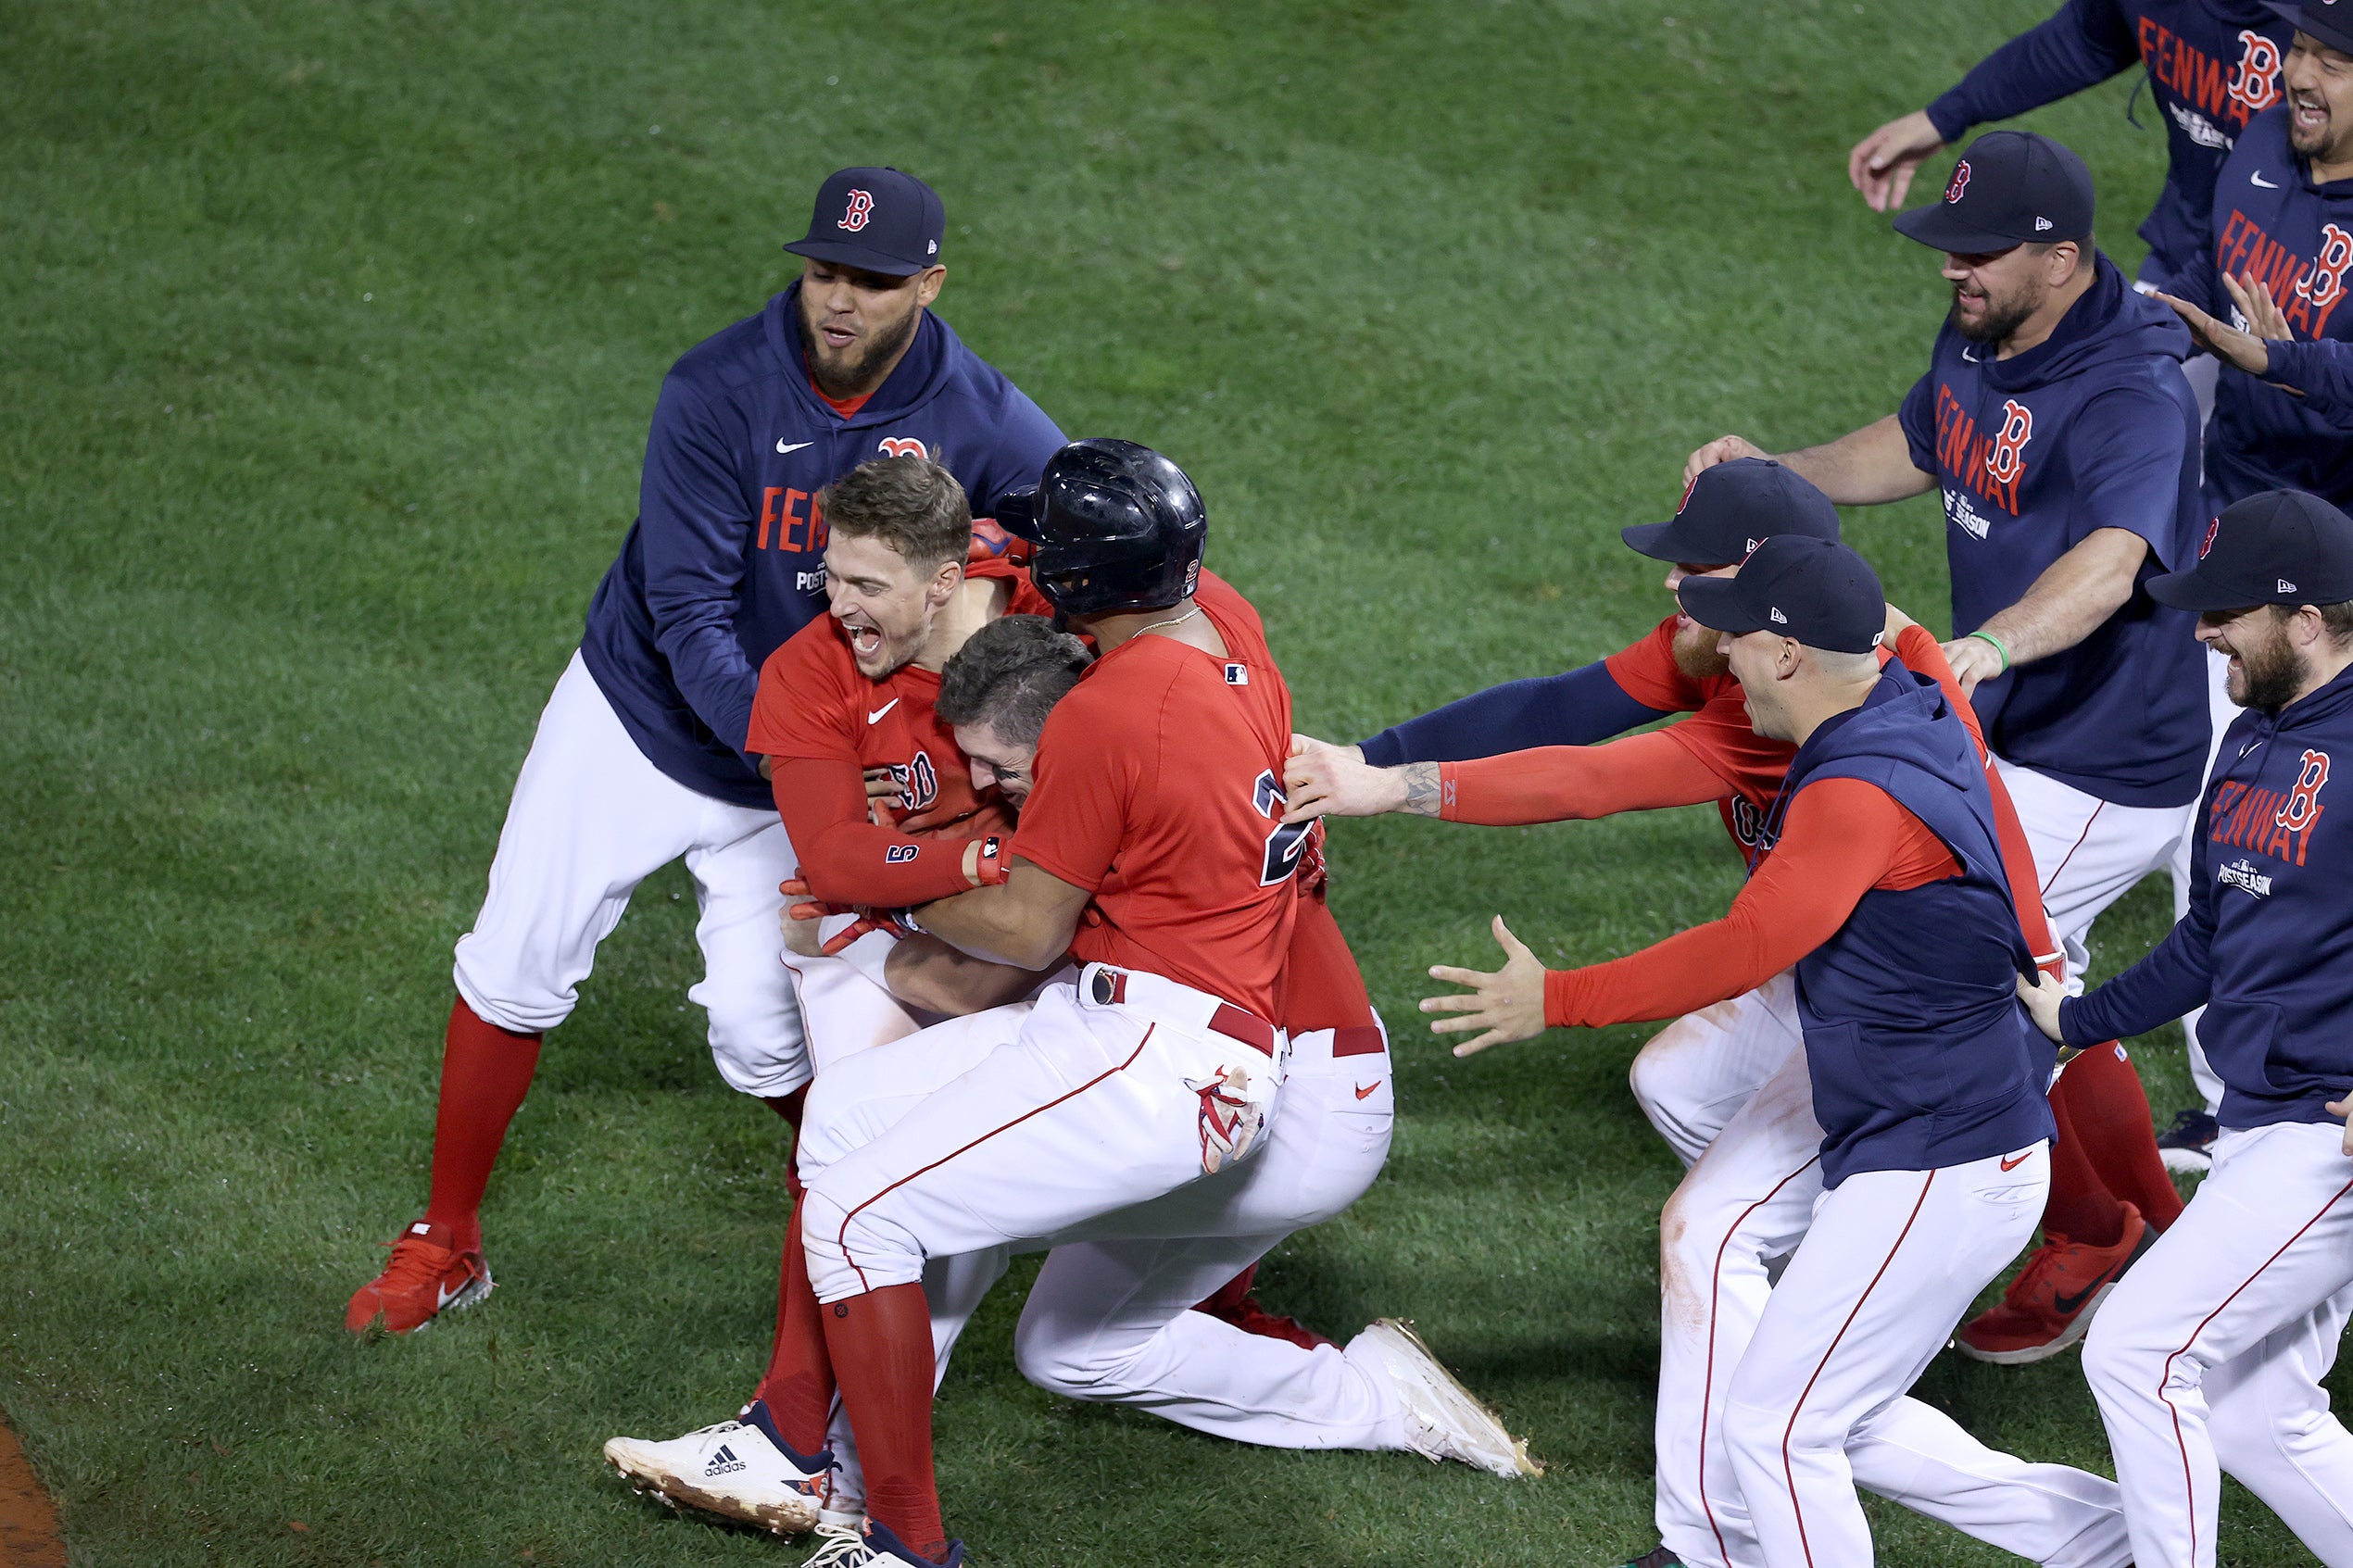 Red Sox defeat Rays in Game 4 to advance to the ALCS